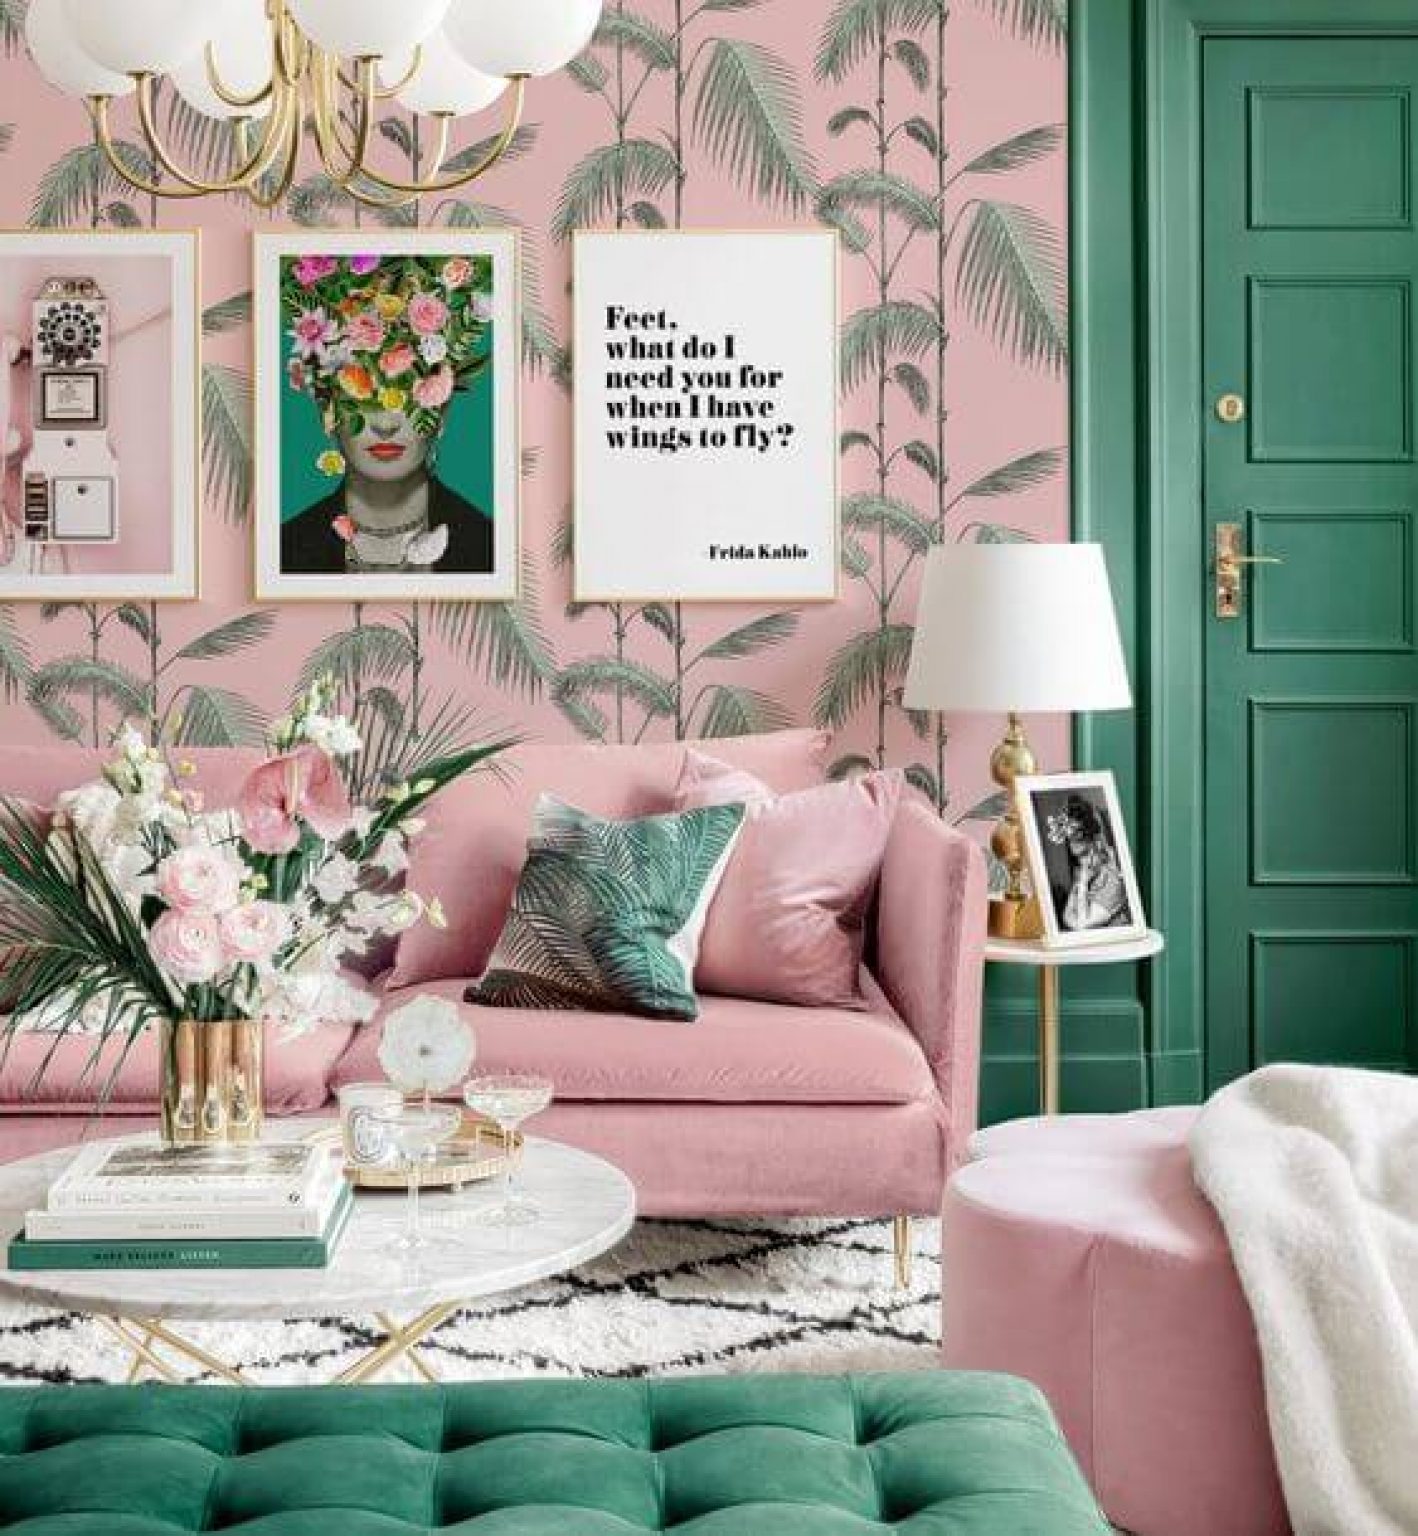 Expert Advice: How to Decorate with Roses - Small House Decor